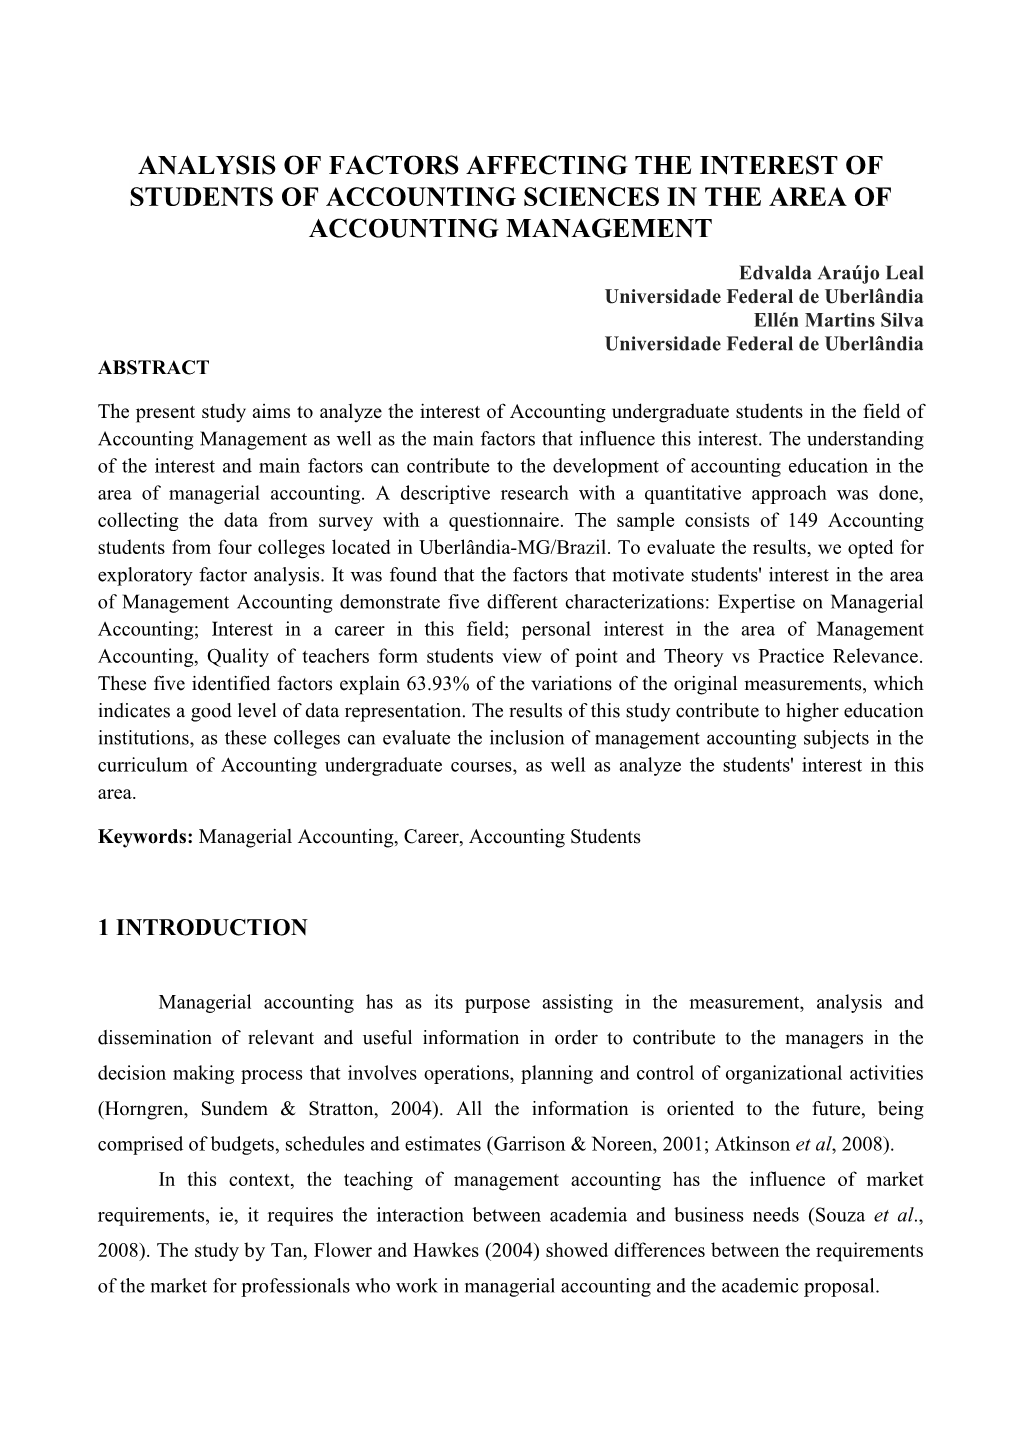 Analysis of Factors Affecting the Interest of Students of Accounting Sciences